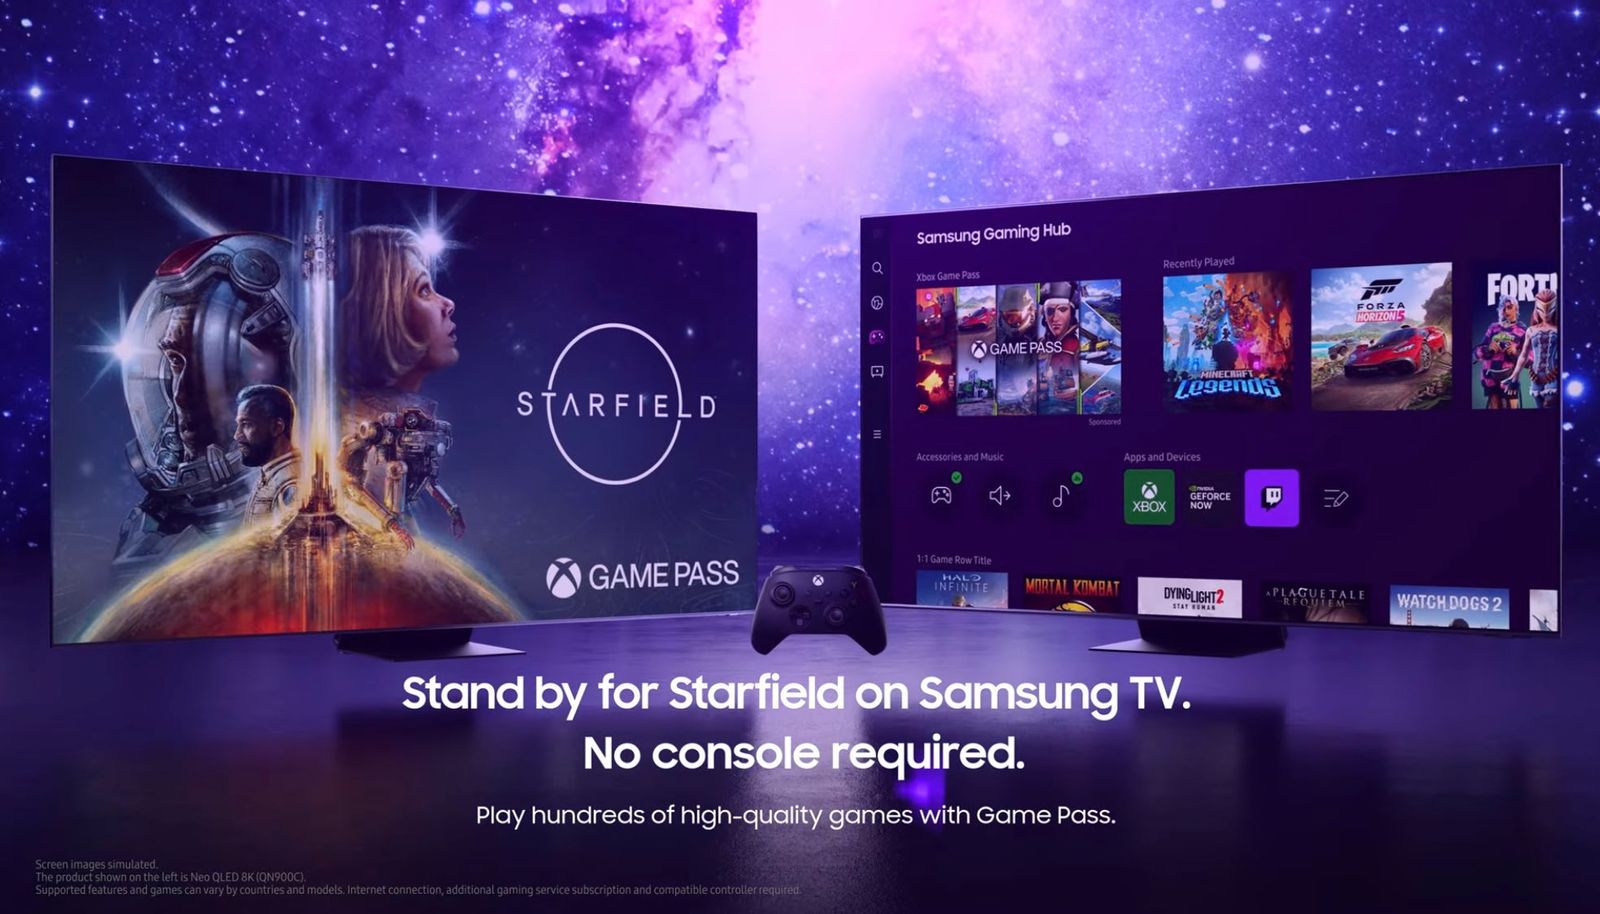 Samsung TV's with starfield and gamepass on display